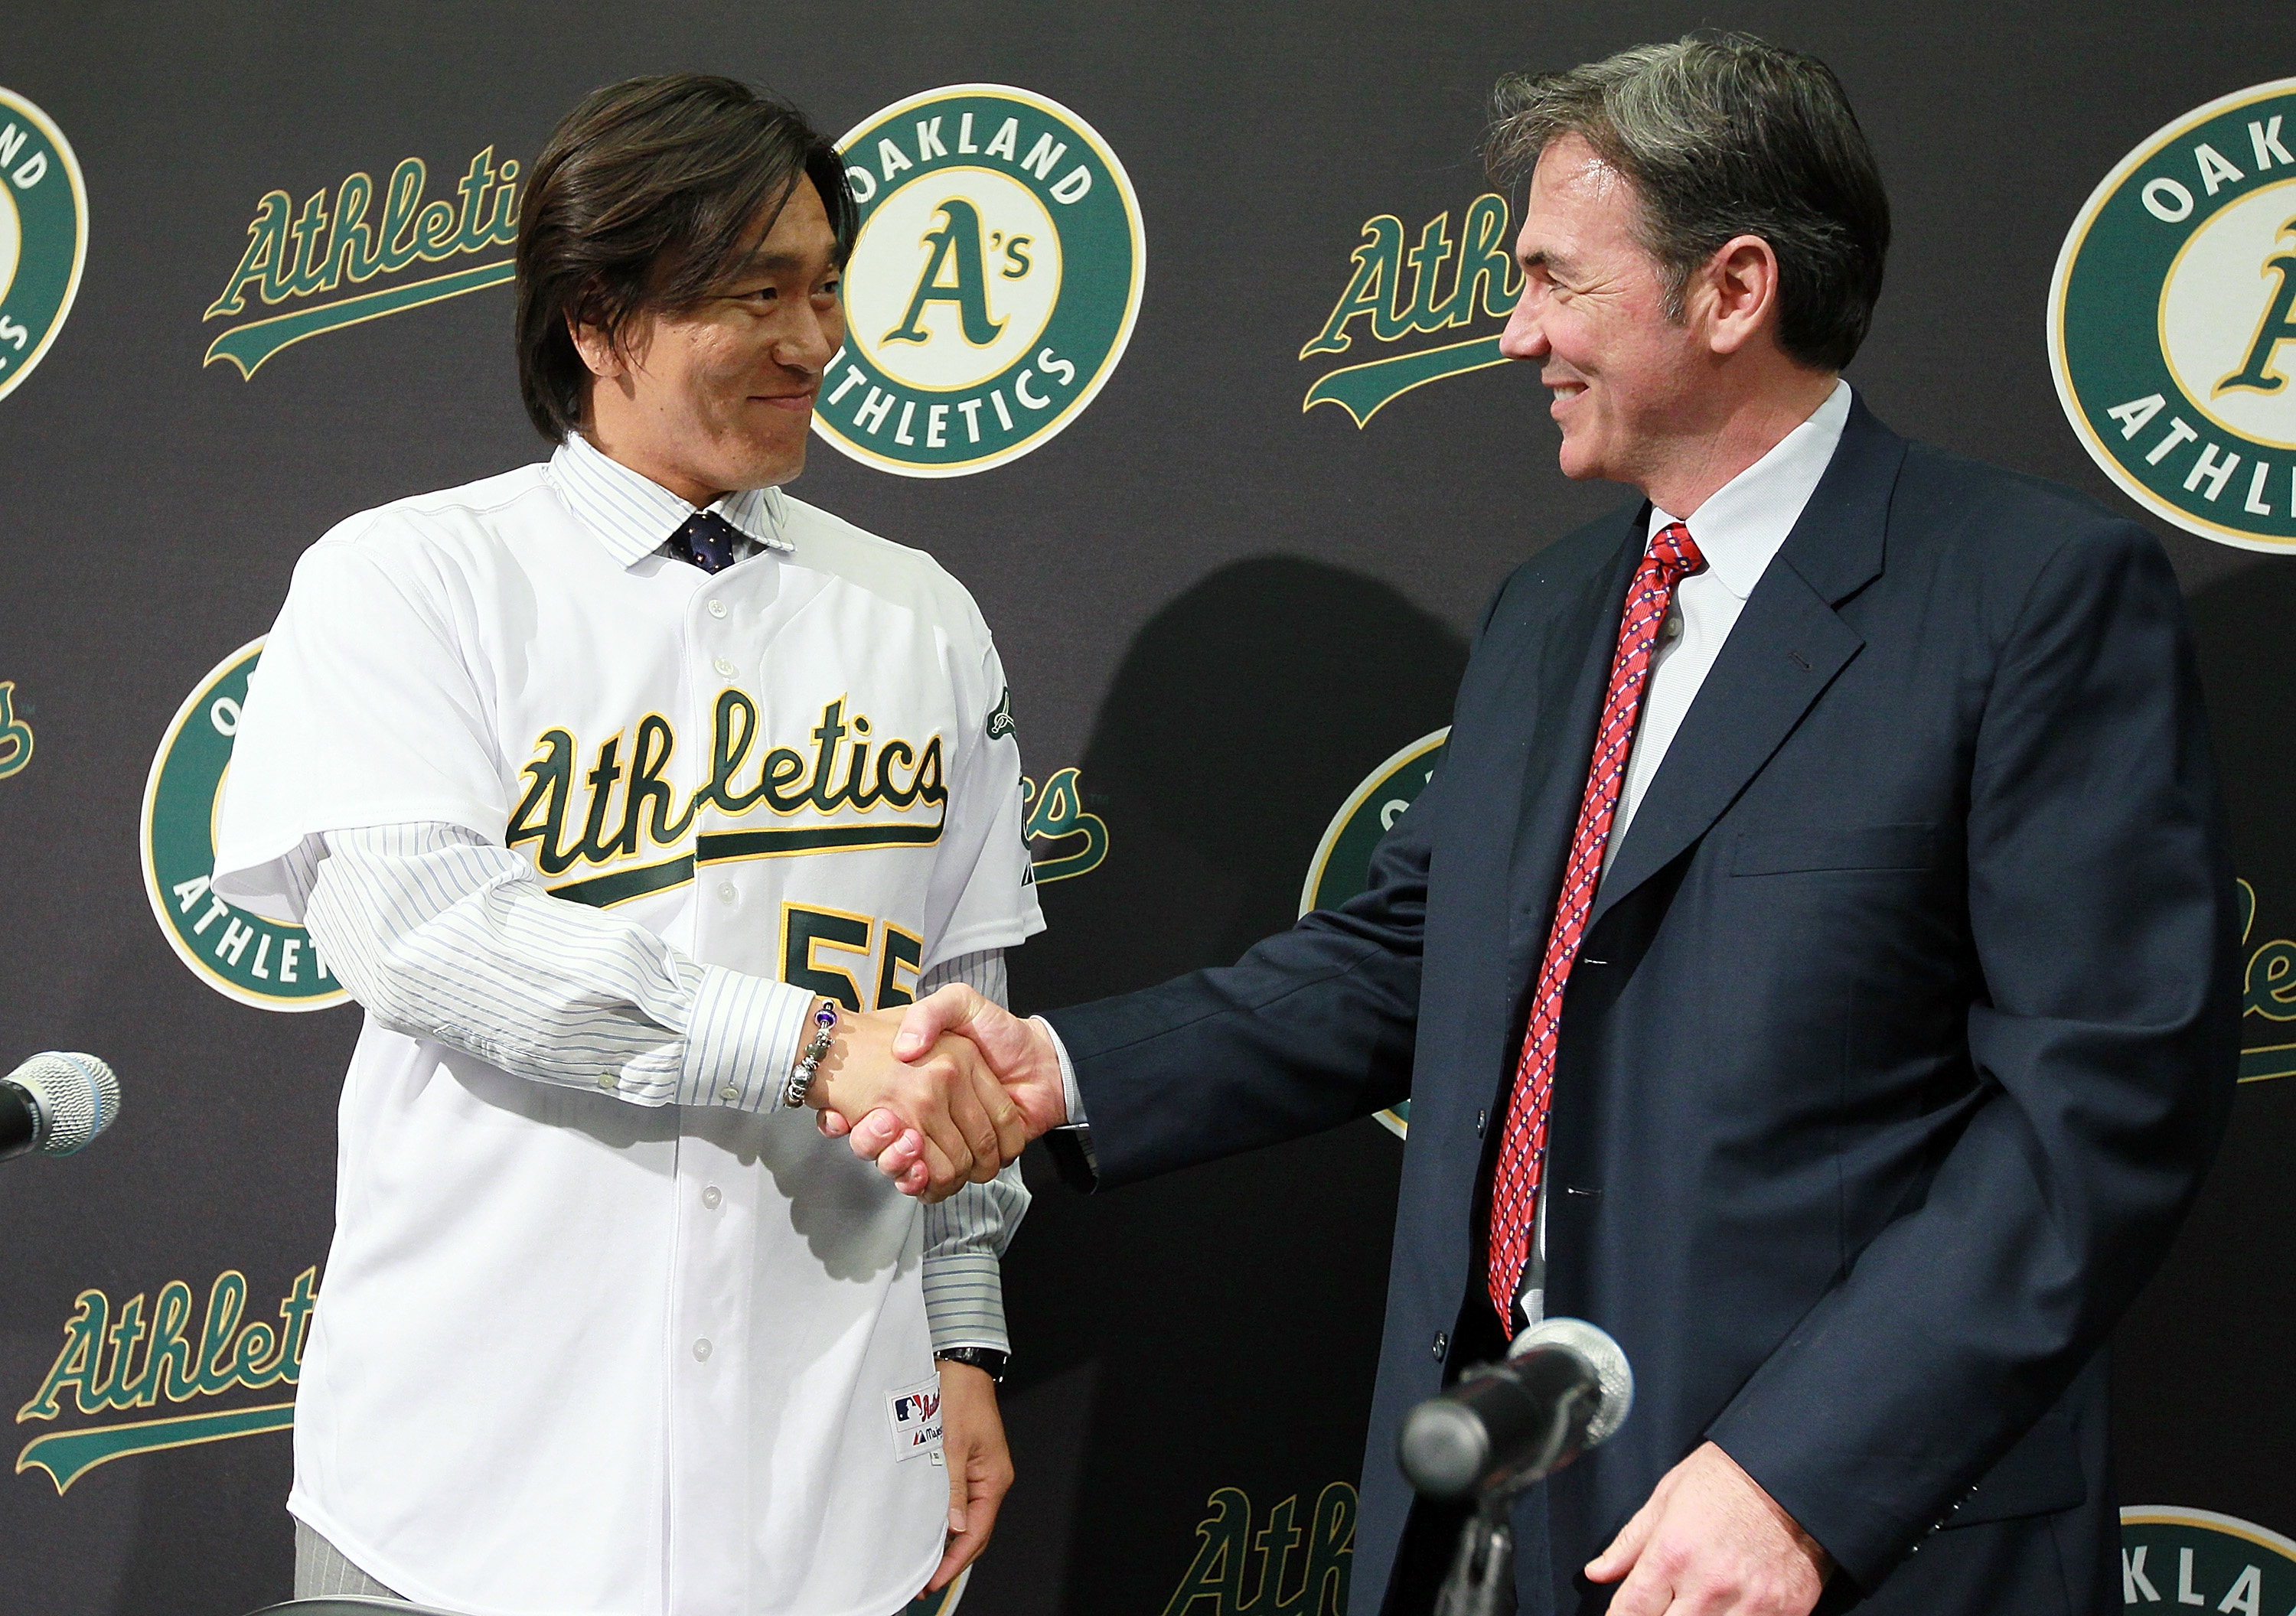 OAKLAND, CA - DECEMBER 14:  Hideki Matsui (L) shakes hands with Oakland Athletics general manager Billy Beane (R) after trying on his new jersey during a press conference where he was introduced as the newest member of the Oakland Athletics at Oakland-Ala